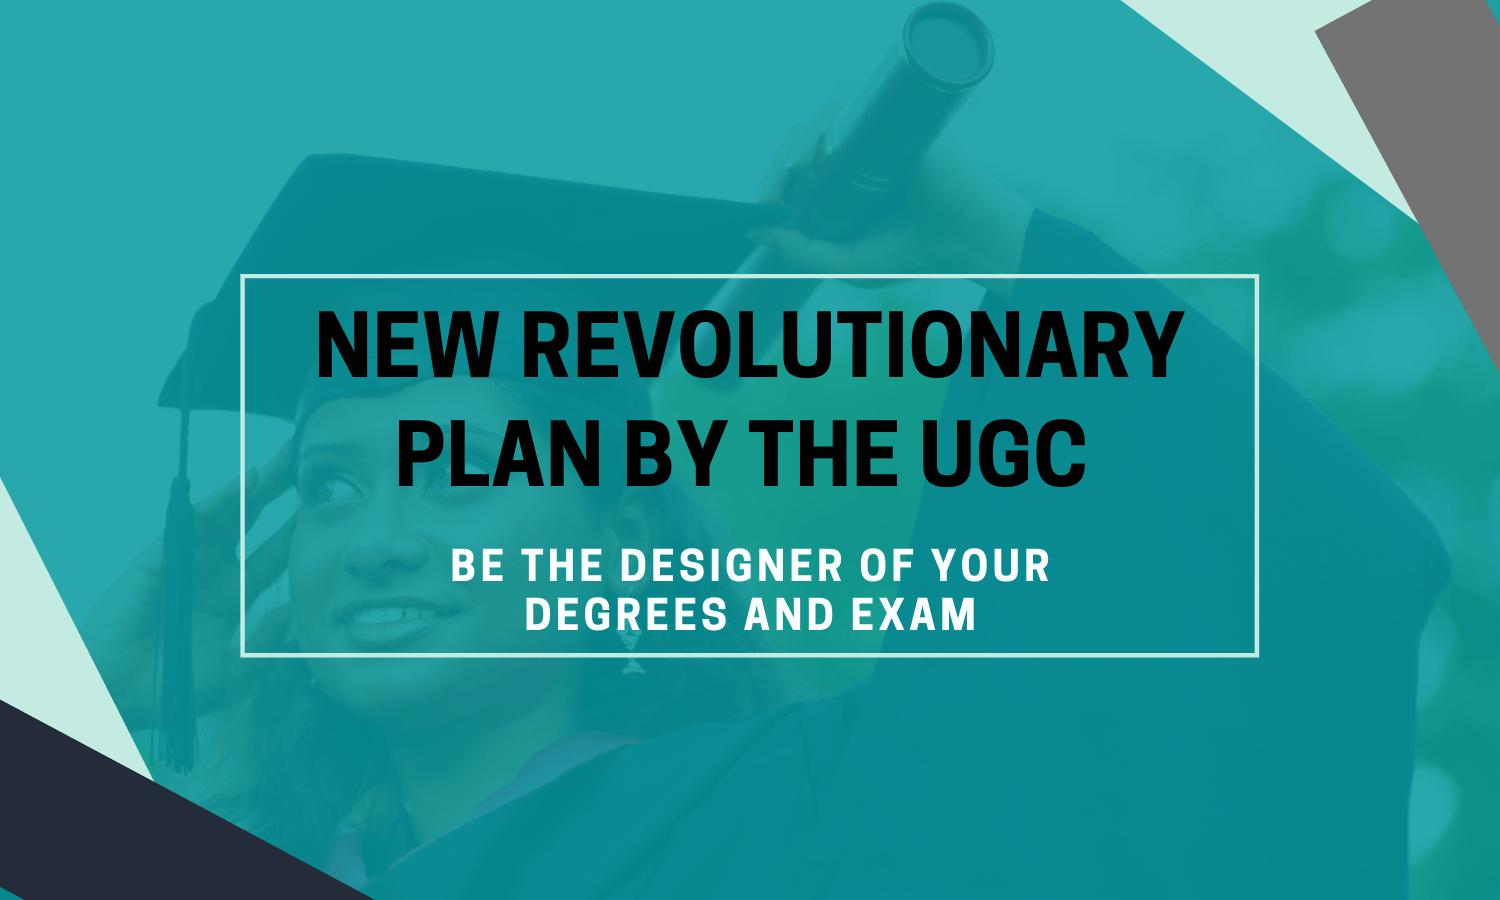 New revolutionary plan by the UGC for blended learning